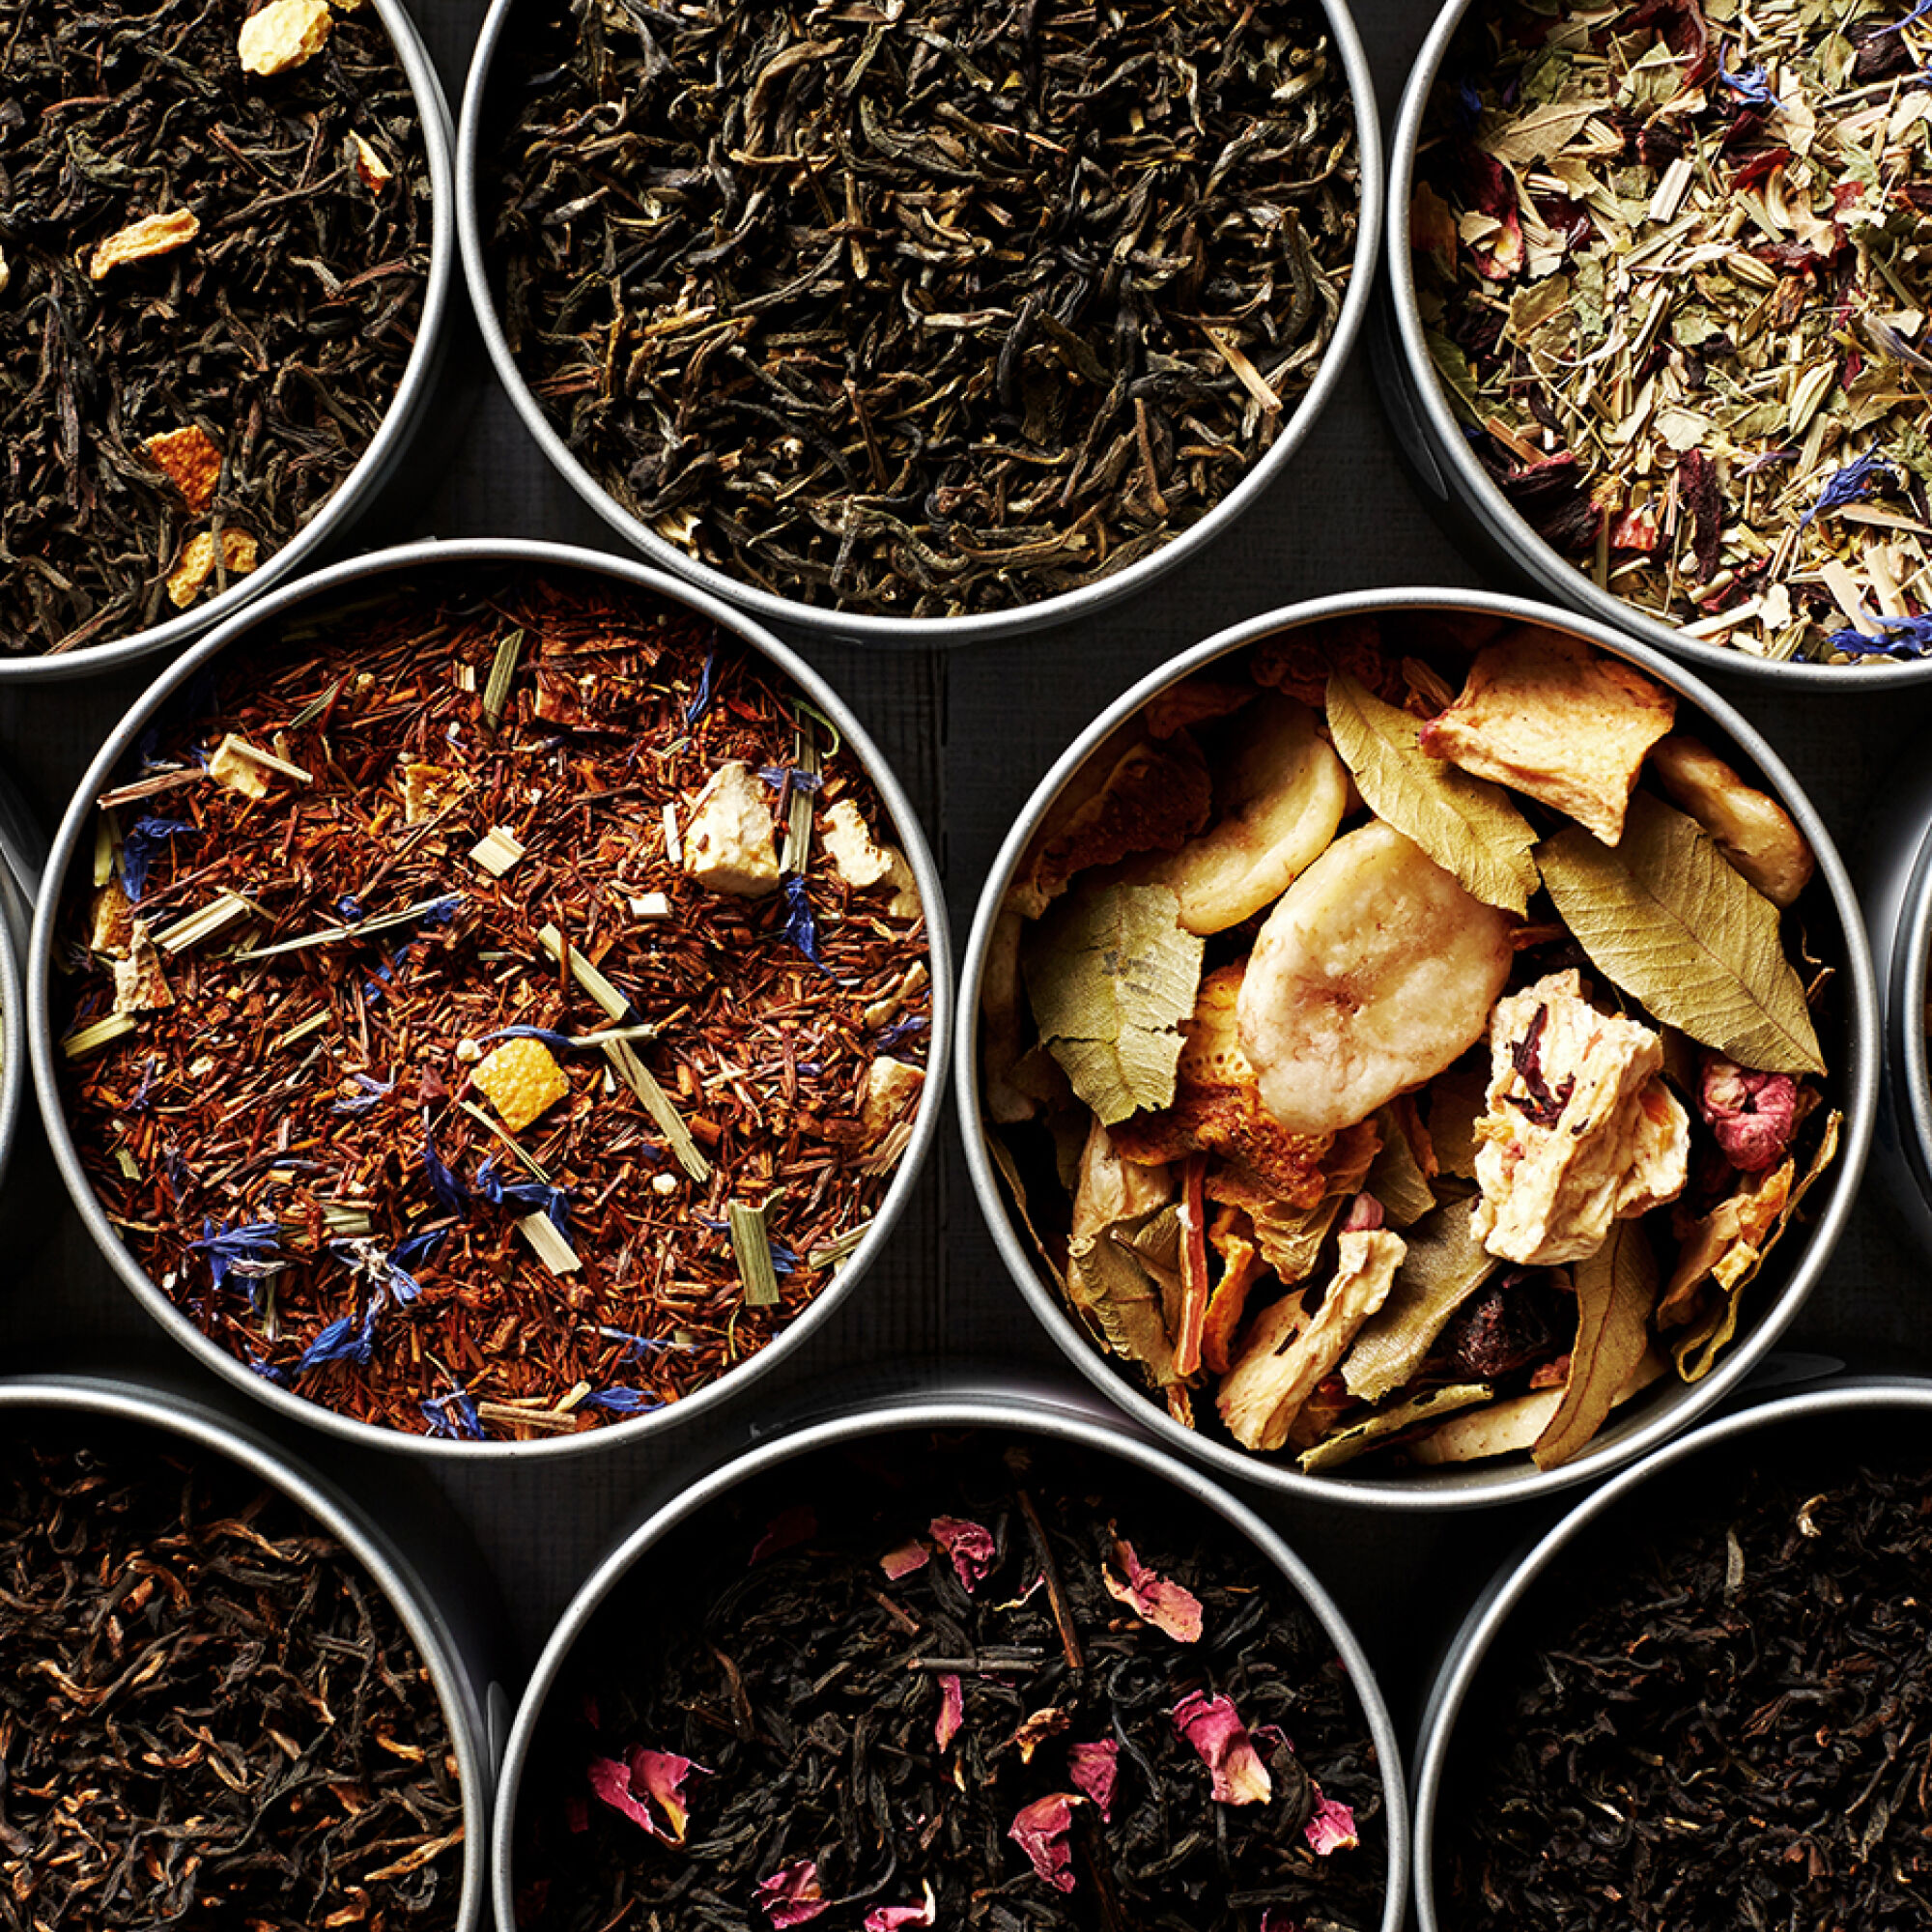 Eight selections of Tea